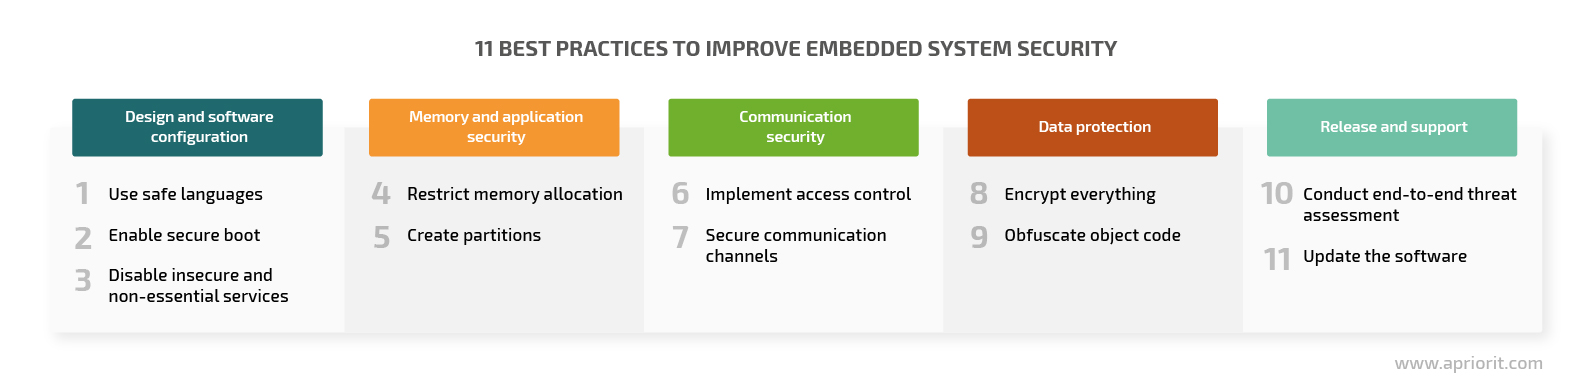 11 best practices to improve embedded system security